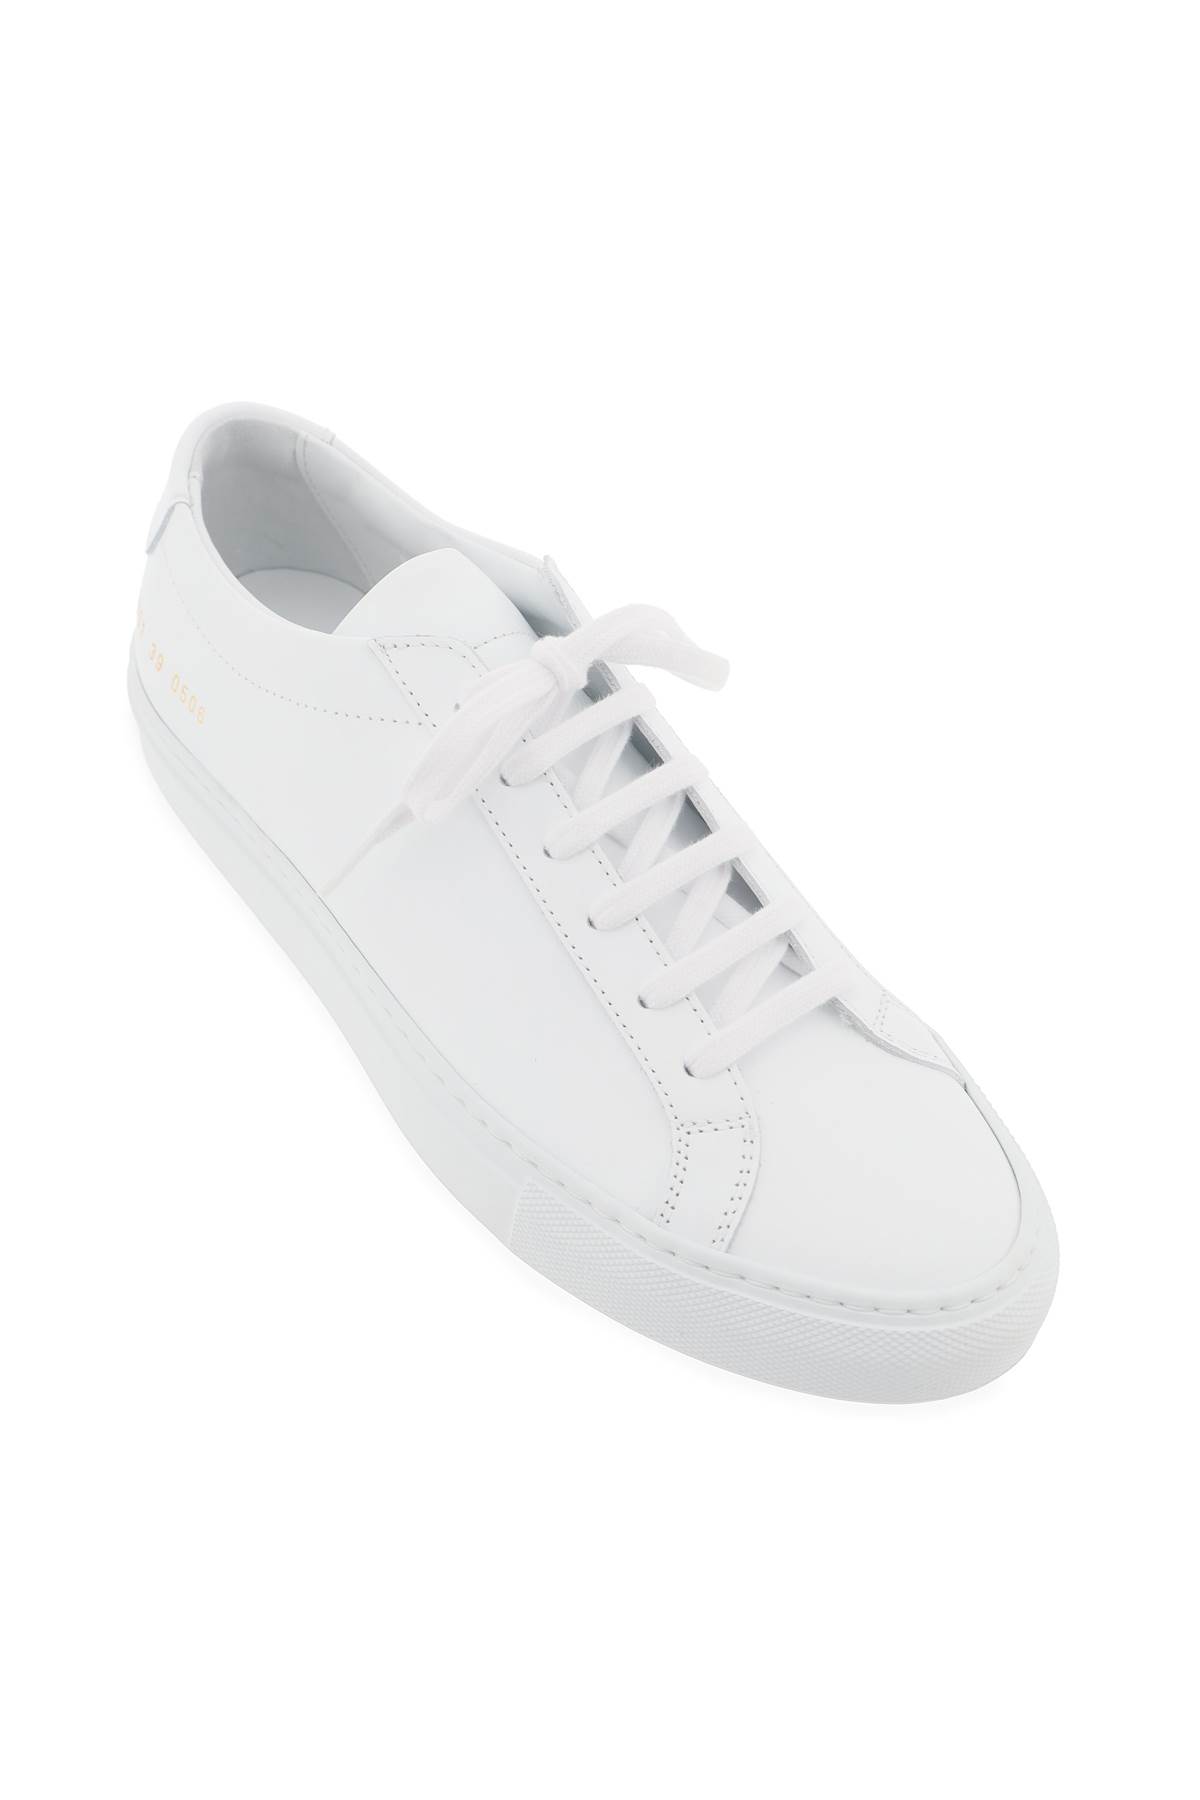 Shop Common Projects Original Achilles Leather Sneakers In White (white)